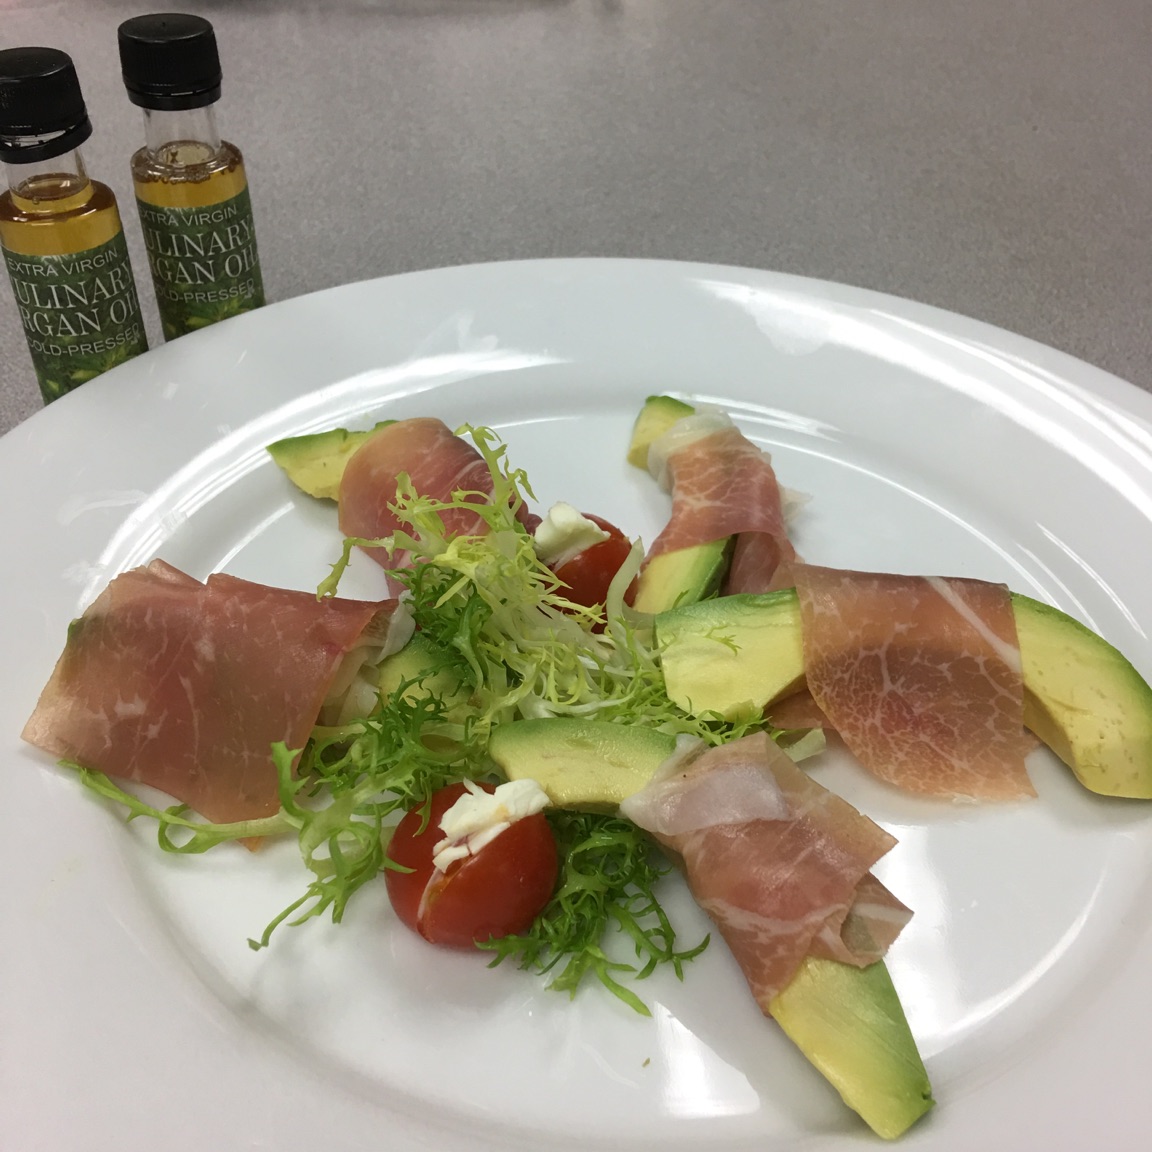 AVOCADO WRAPPED IN PROSCIUTTO HAM WITH A SIDE OF FRISEE SALAD FEATURING ARGAN OIL